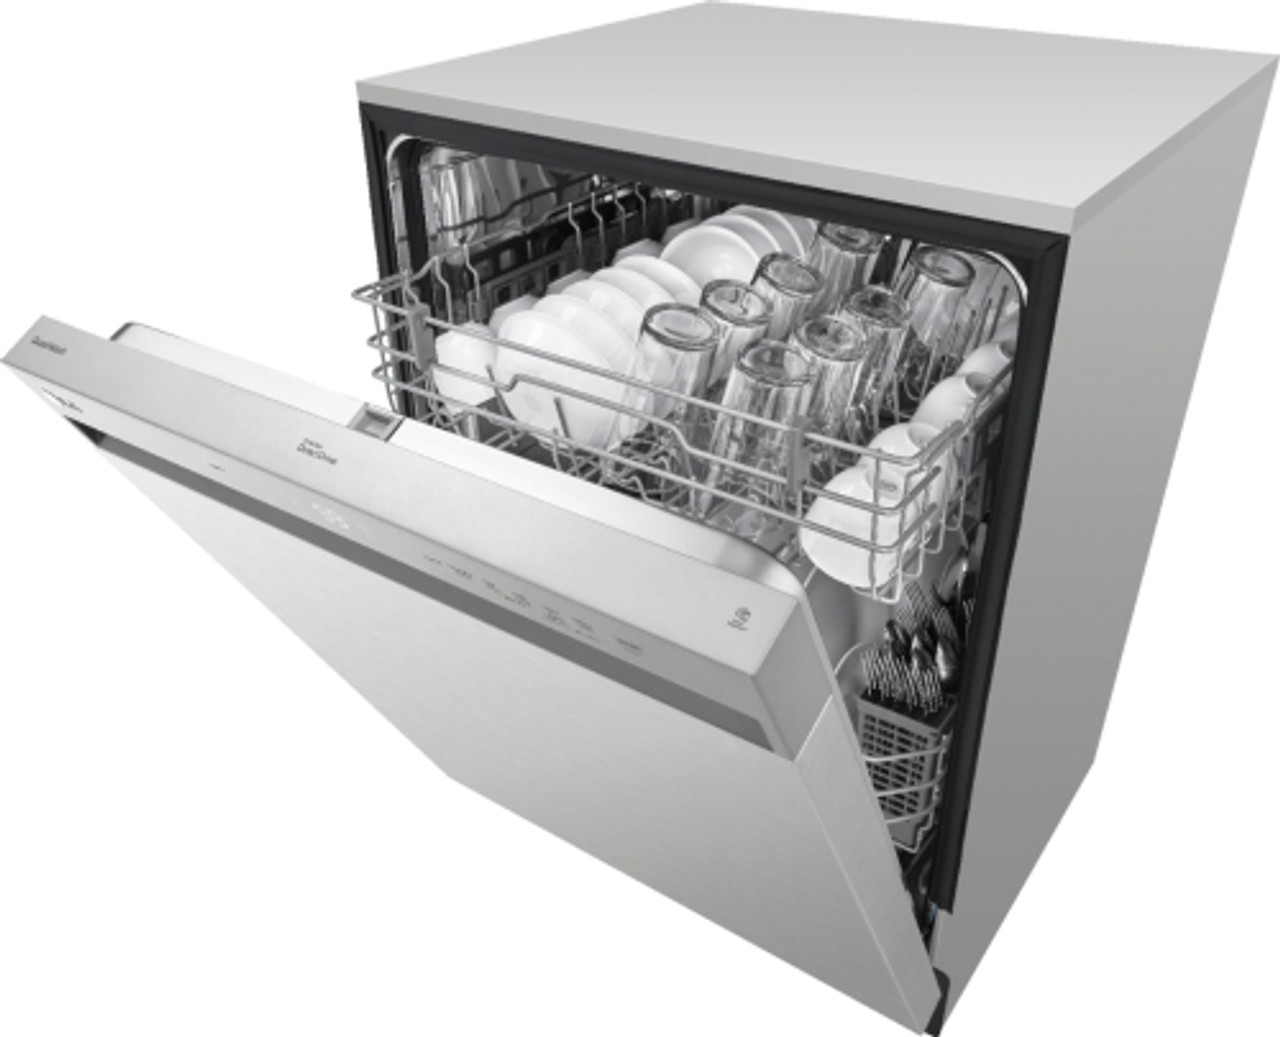 LG - 24" Front-Control Built-In Dishwasher with Stainless Steel Tub, QuadWash, 50 dBa - Stainless steel